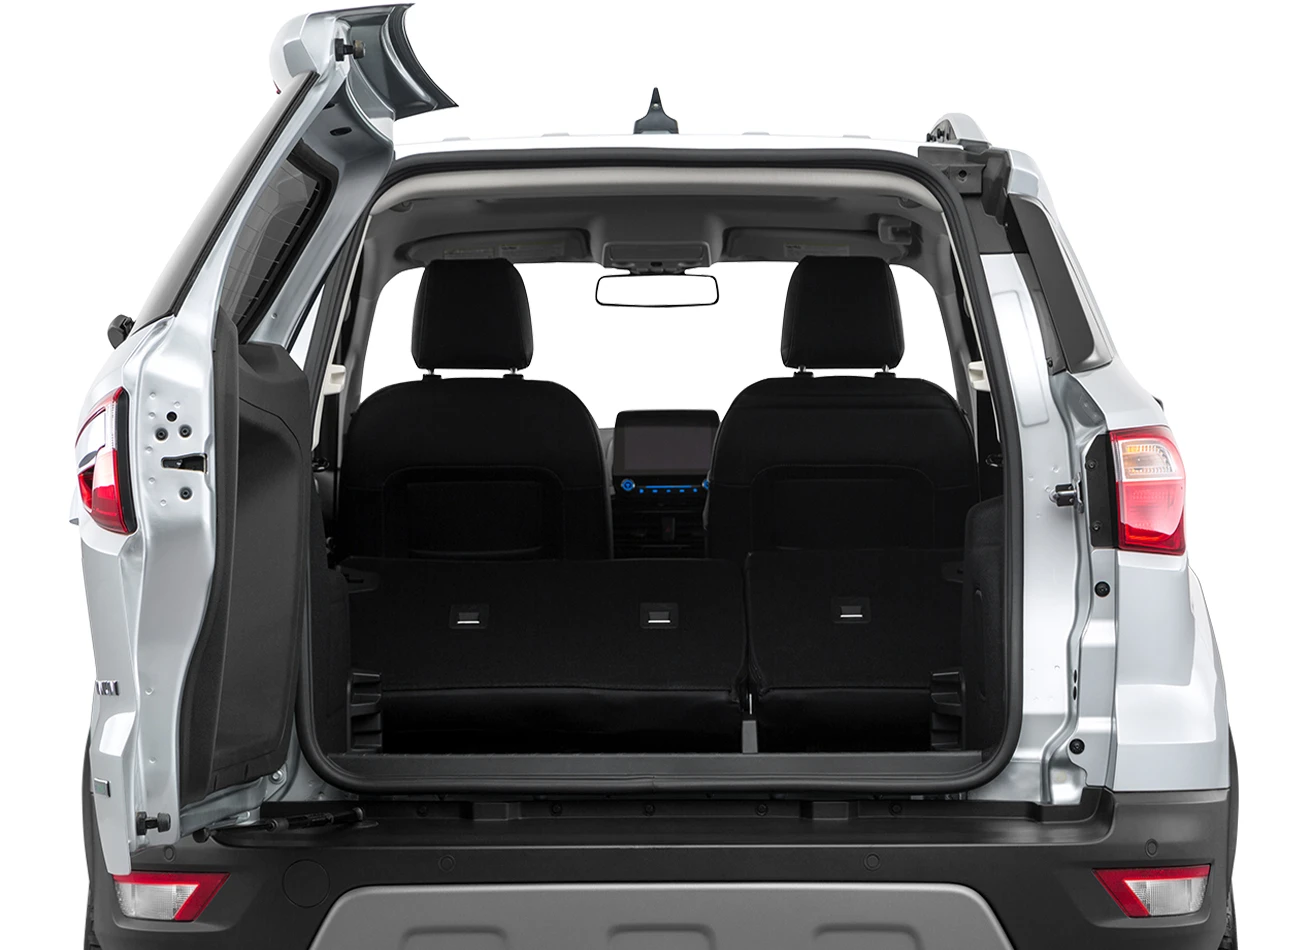 2020 Ford Ecosport Review: Trunk space | CarMax